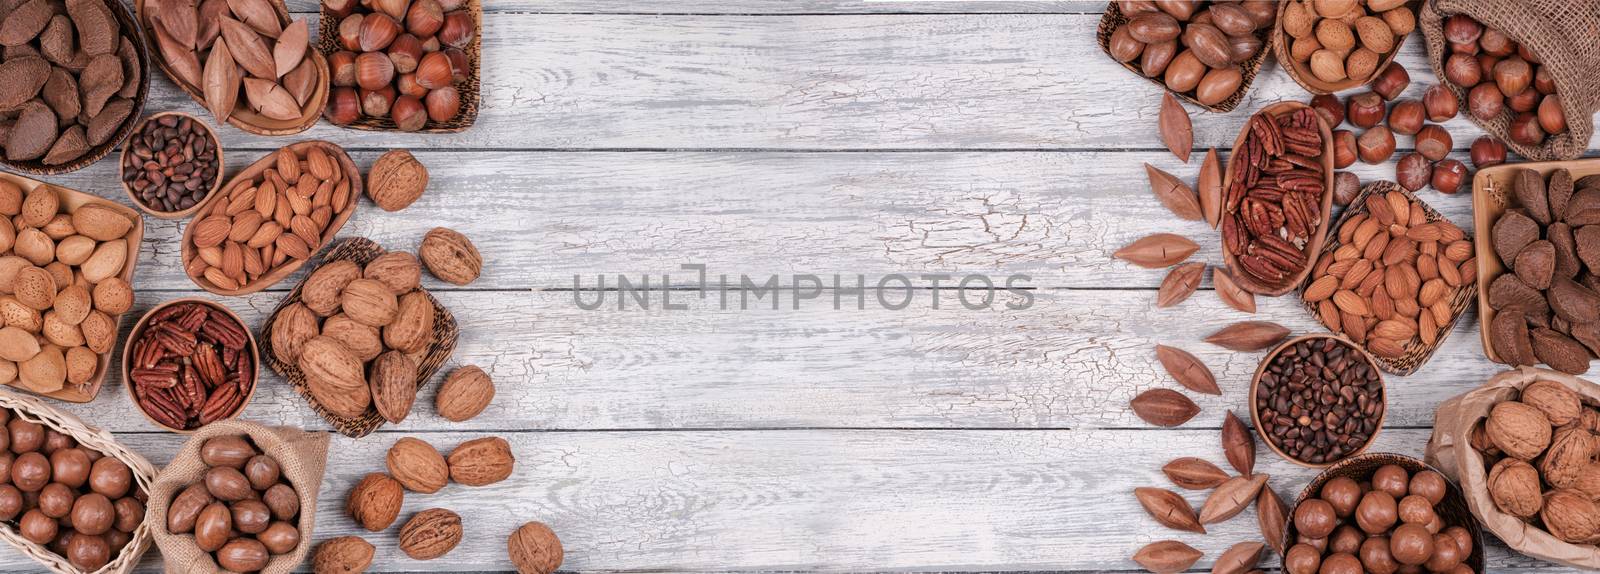 Panorama of various nuts on old wooden background. by Fischeron